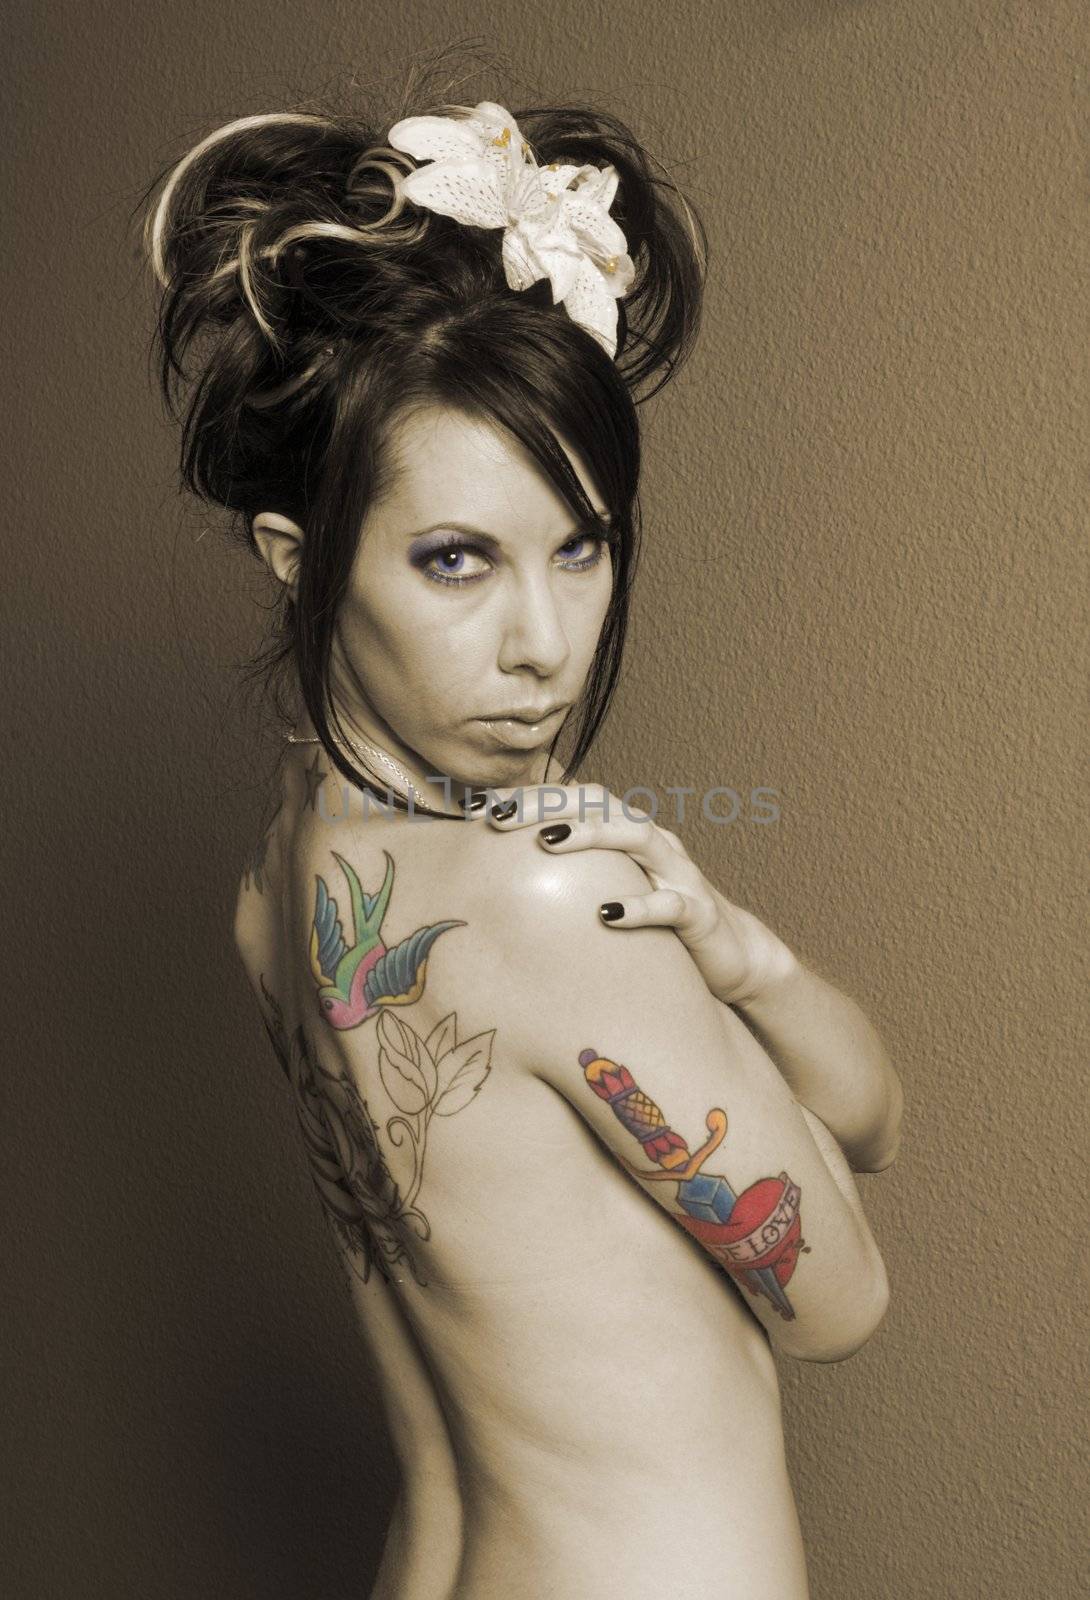 Pretty girl with tattoo's on back by jeffbanke